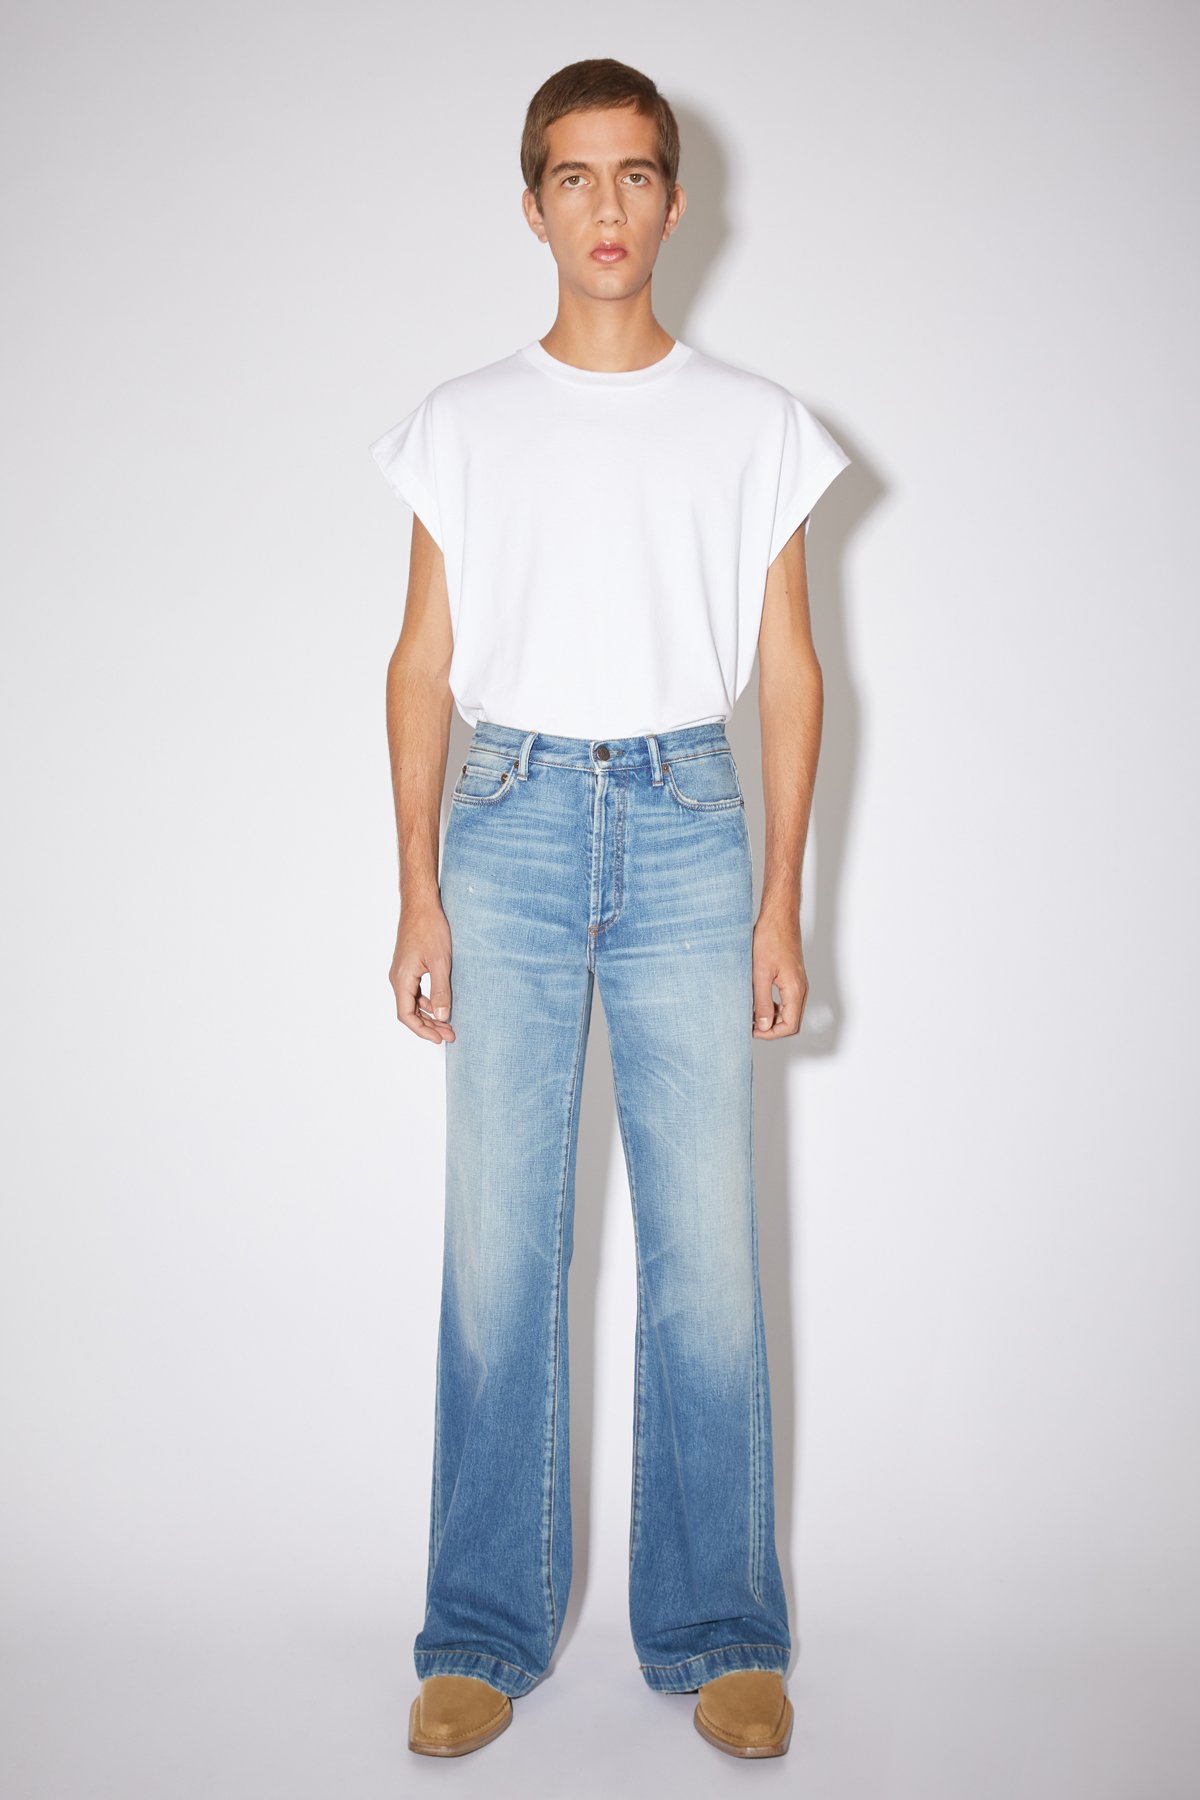 Acne: New in: Acne Studios 1978 bootcut jeans | Milled